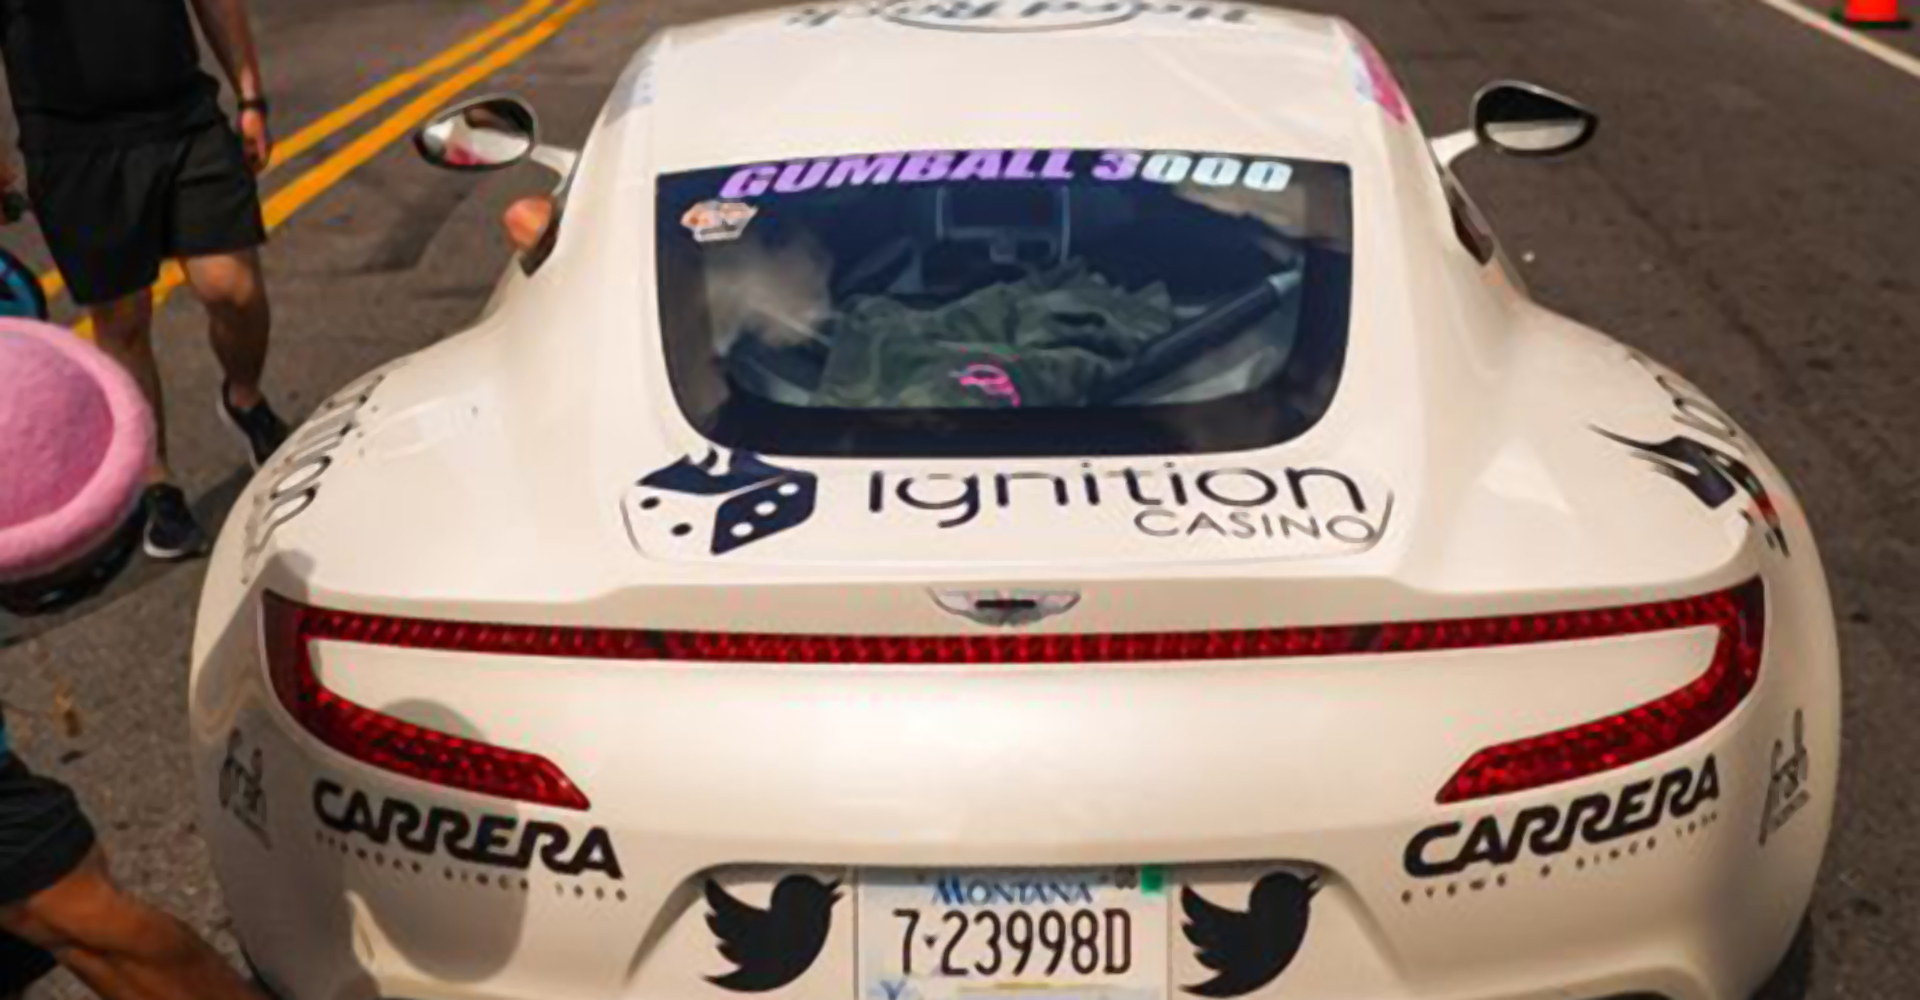 Ignition Gumball rally car in Nashville 2022